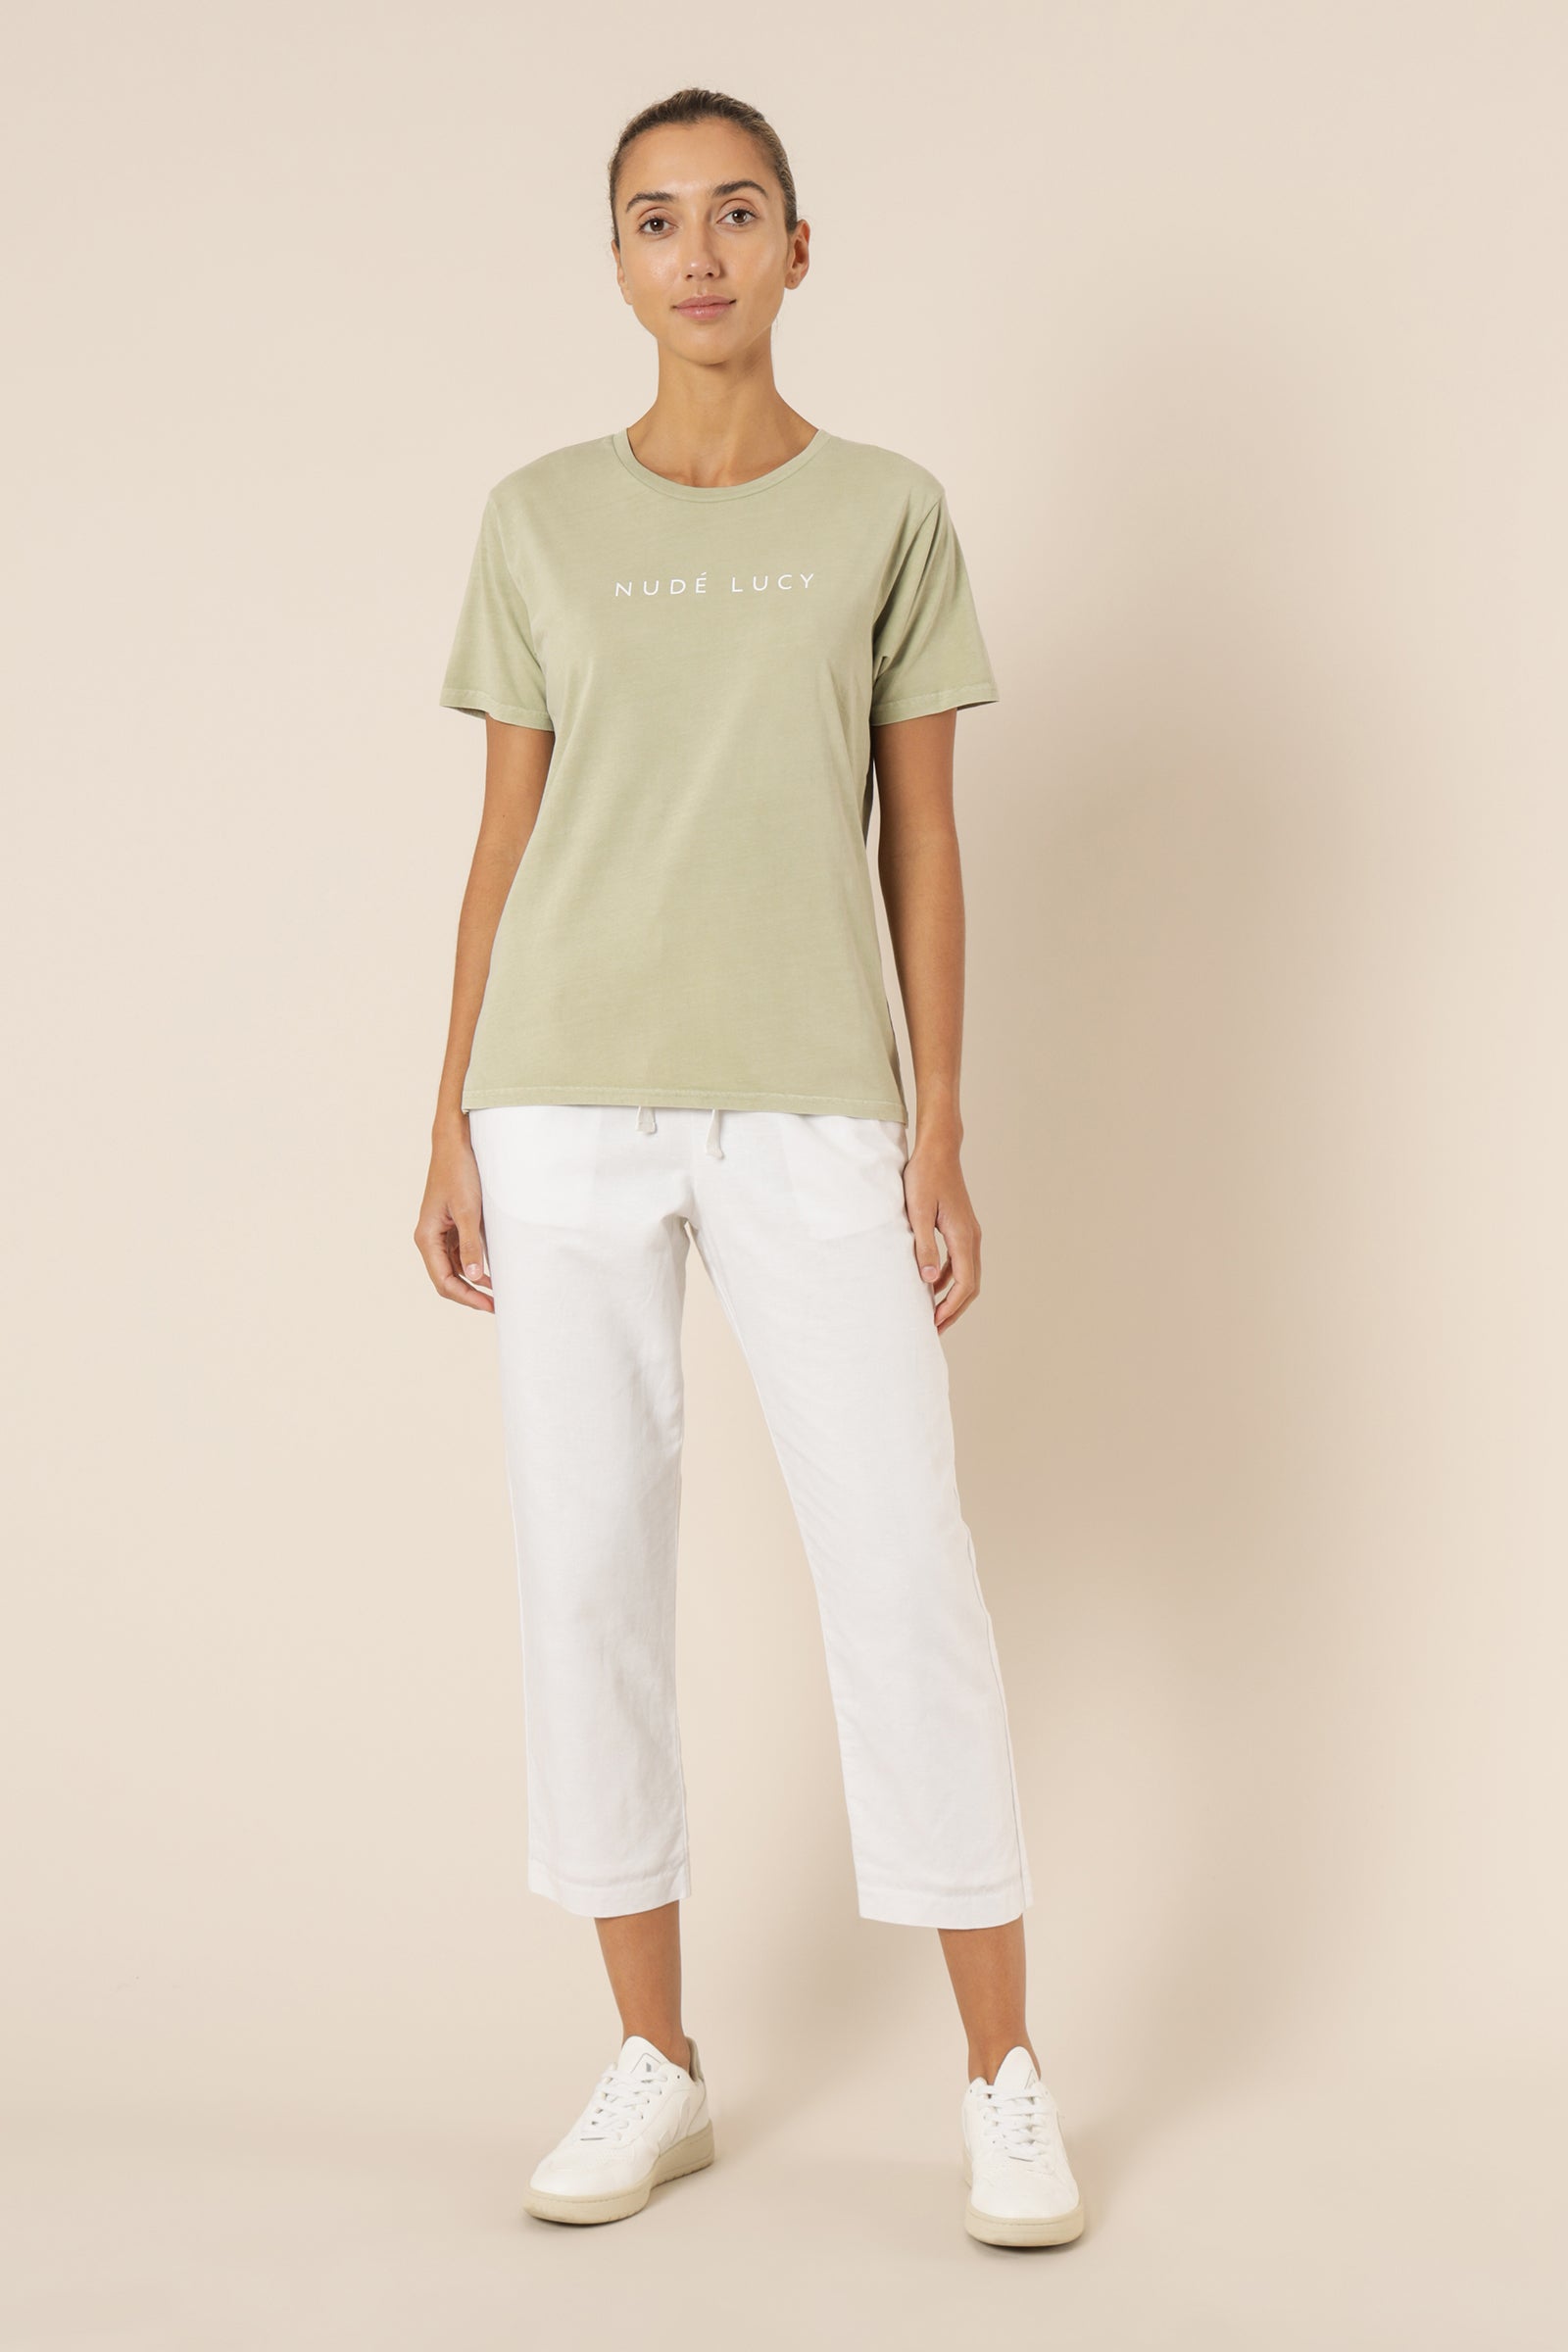 Nude Lucy Nude Lucy Washed Slogan Tee Washed Sage Top 